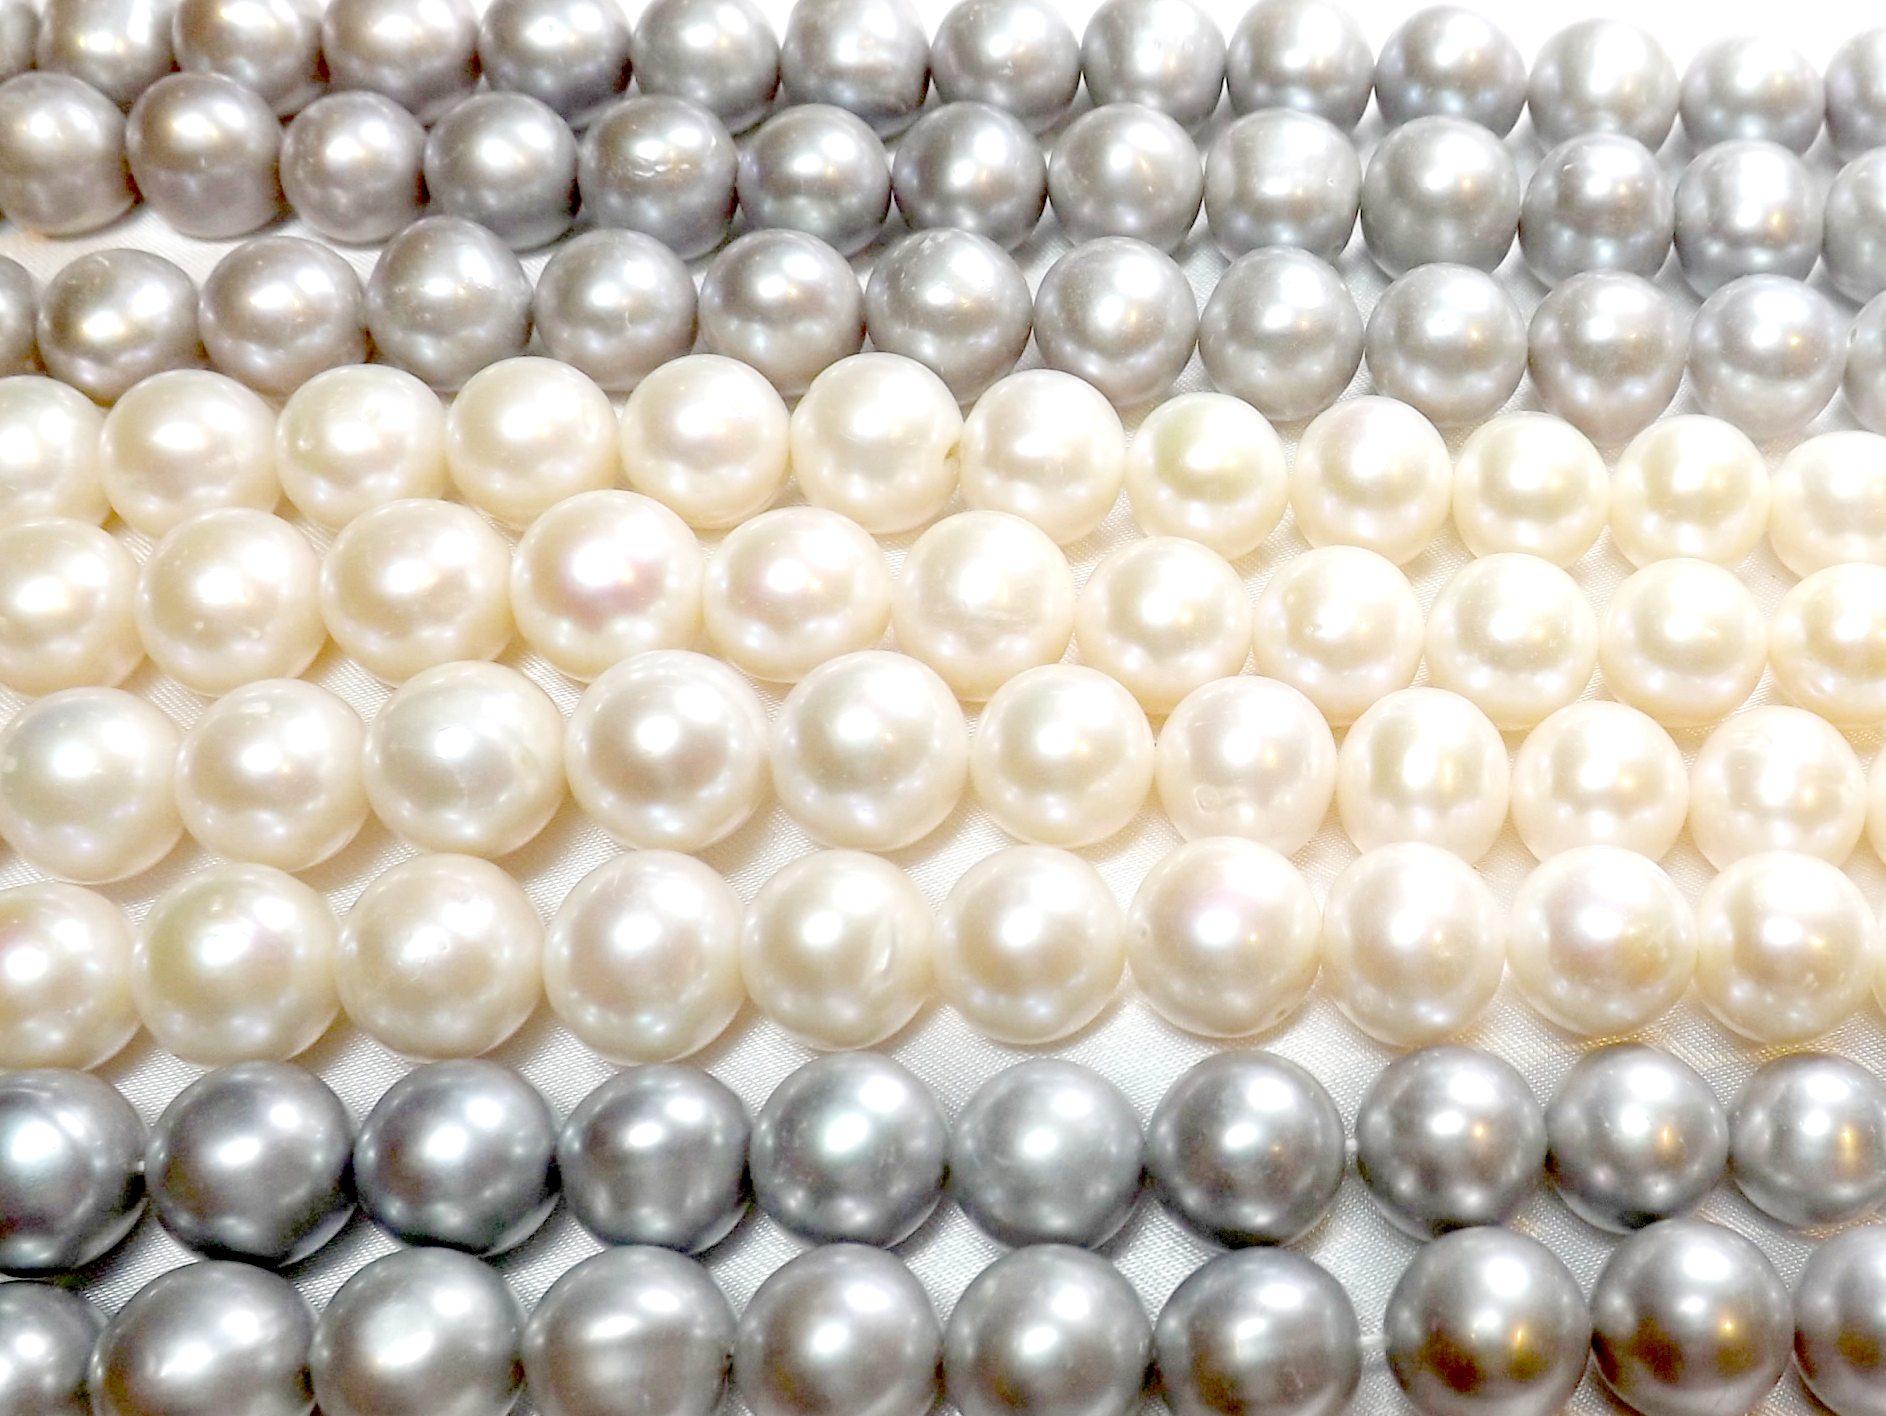 Wholesale Charms Freshwater Pearl Beads Potato Shape Natural